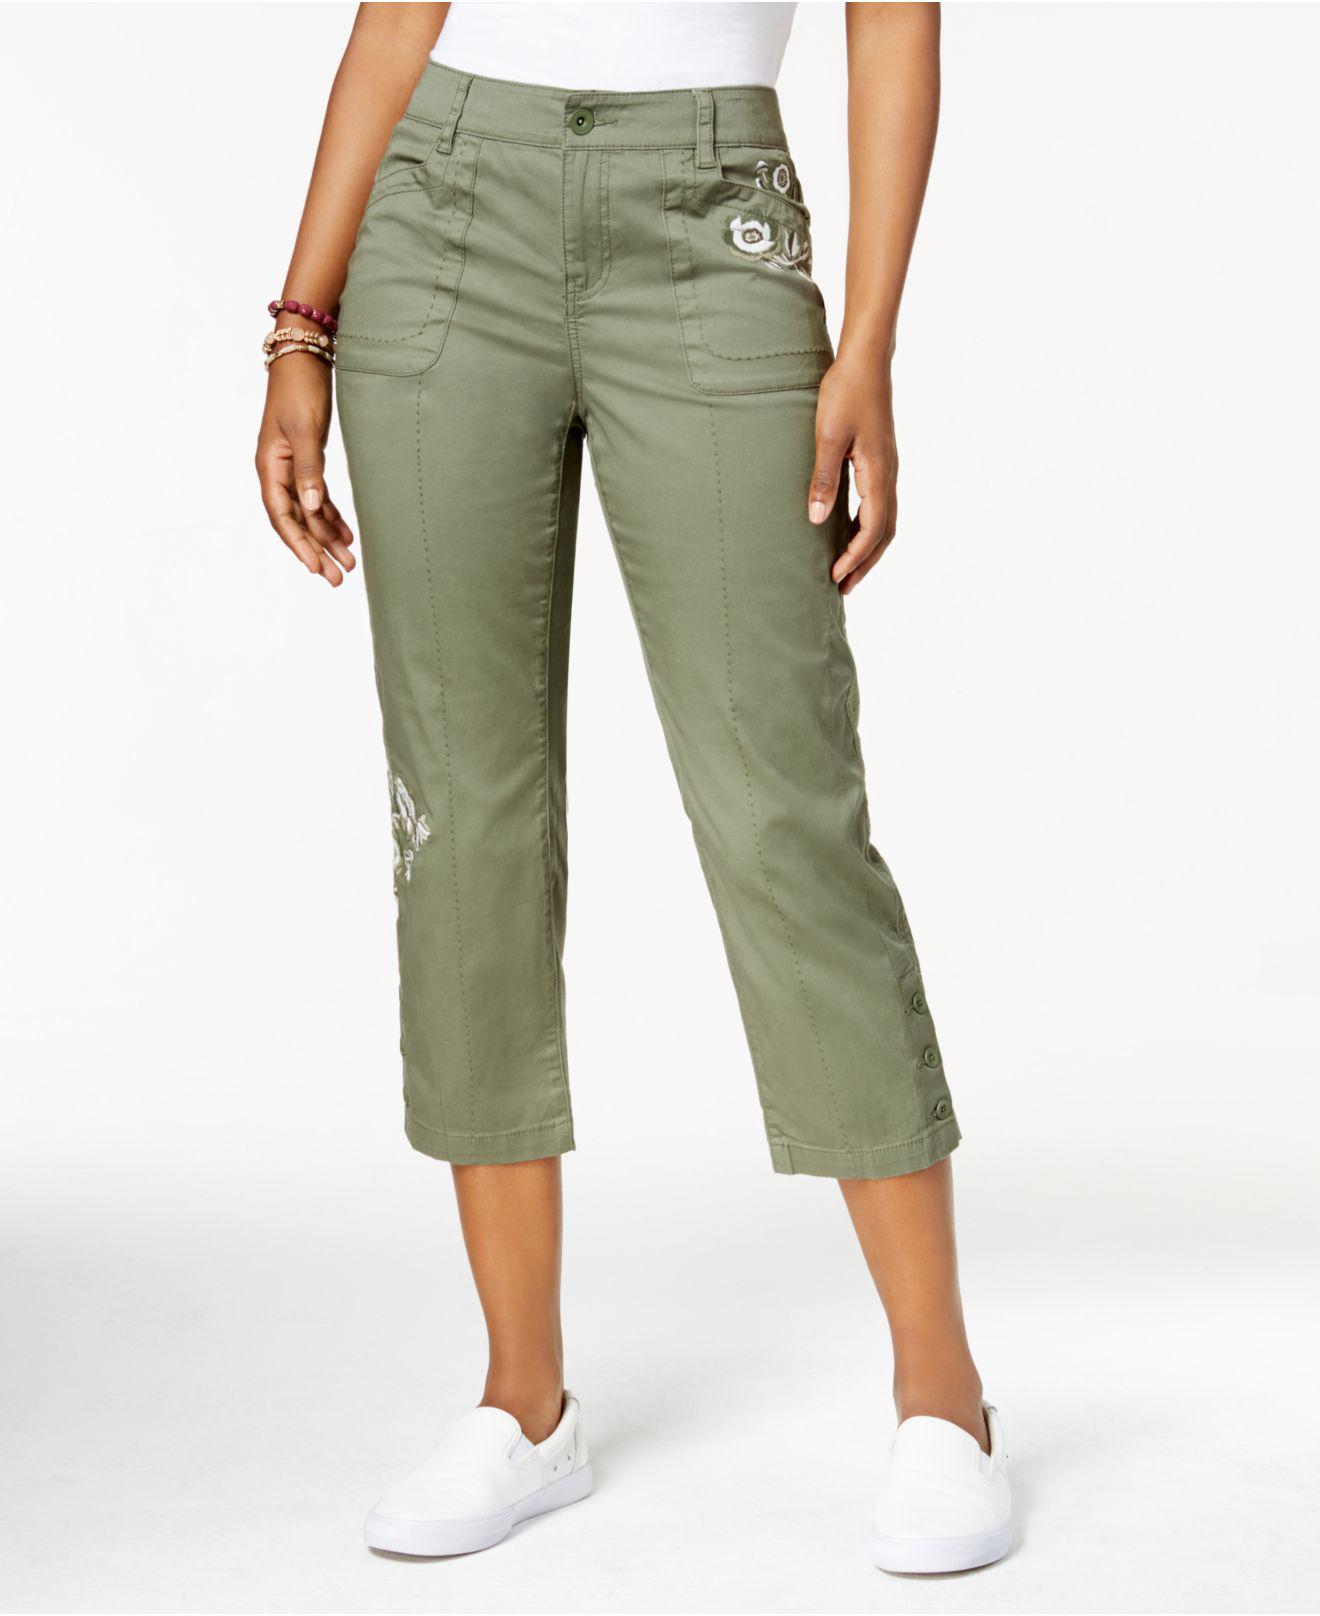 Style & Co. Embroidered Capri Pants in Green - Lyst